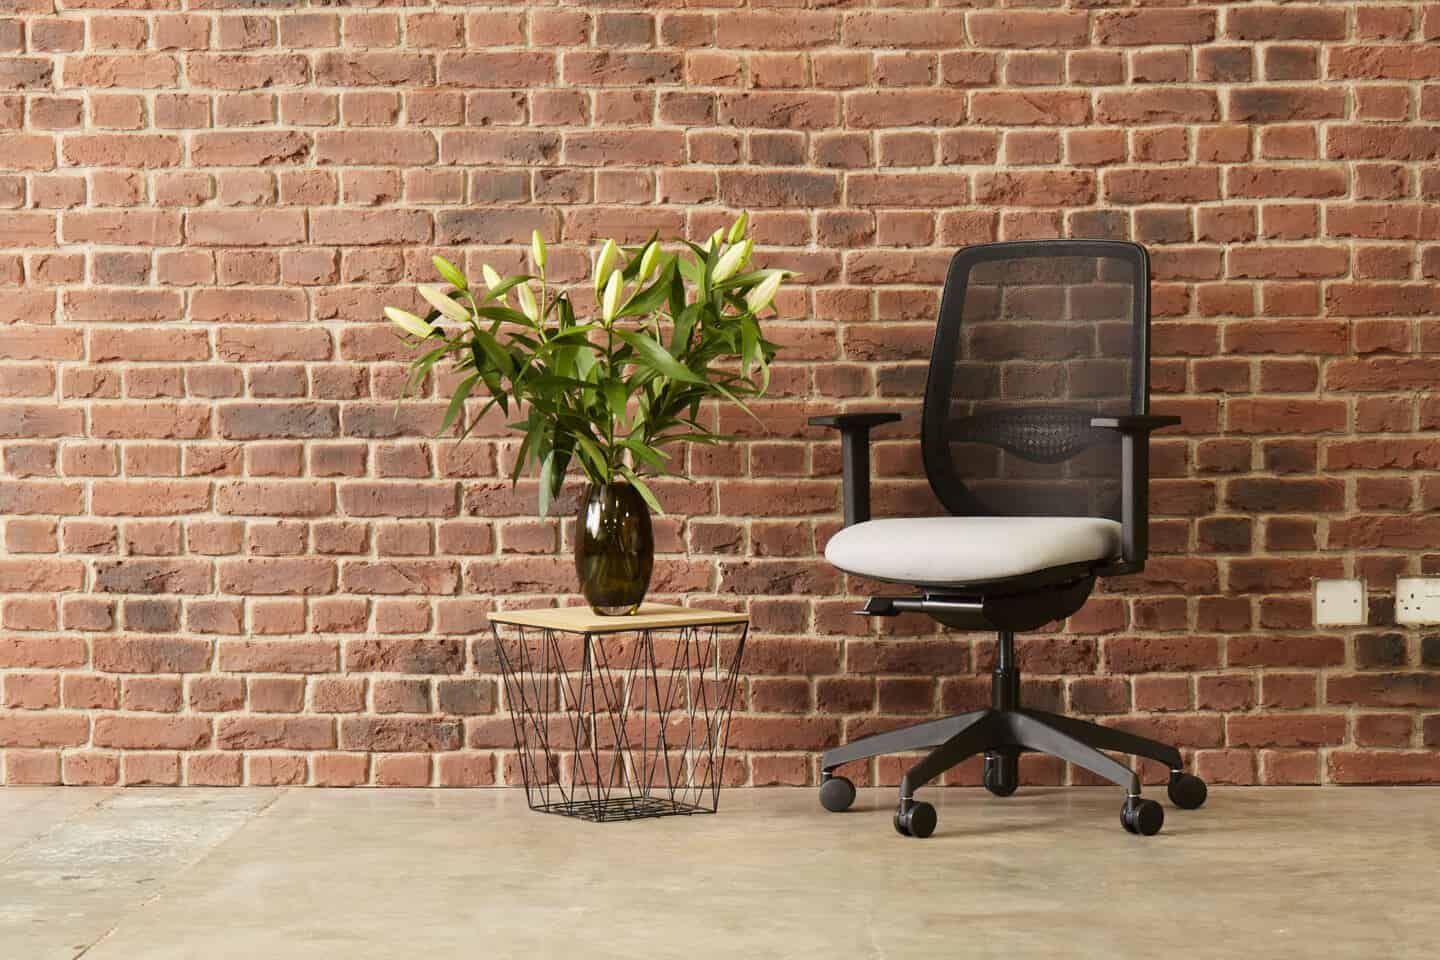 An ergonomic office chair infront of an exposed brick wall and next to a coffee table with a vase of flowers on it